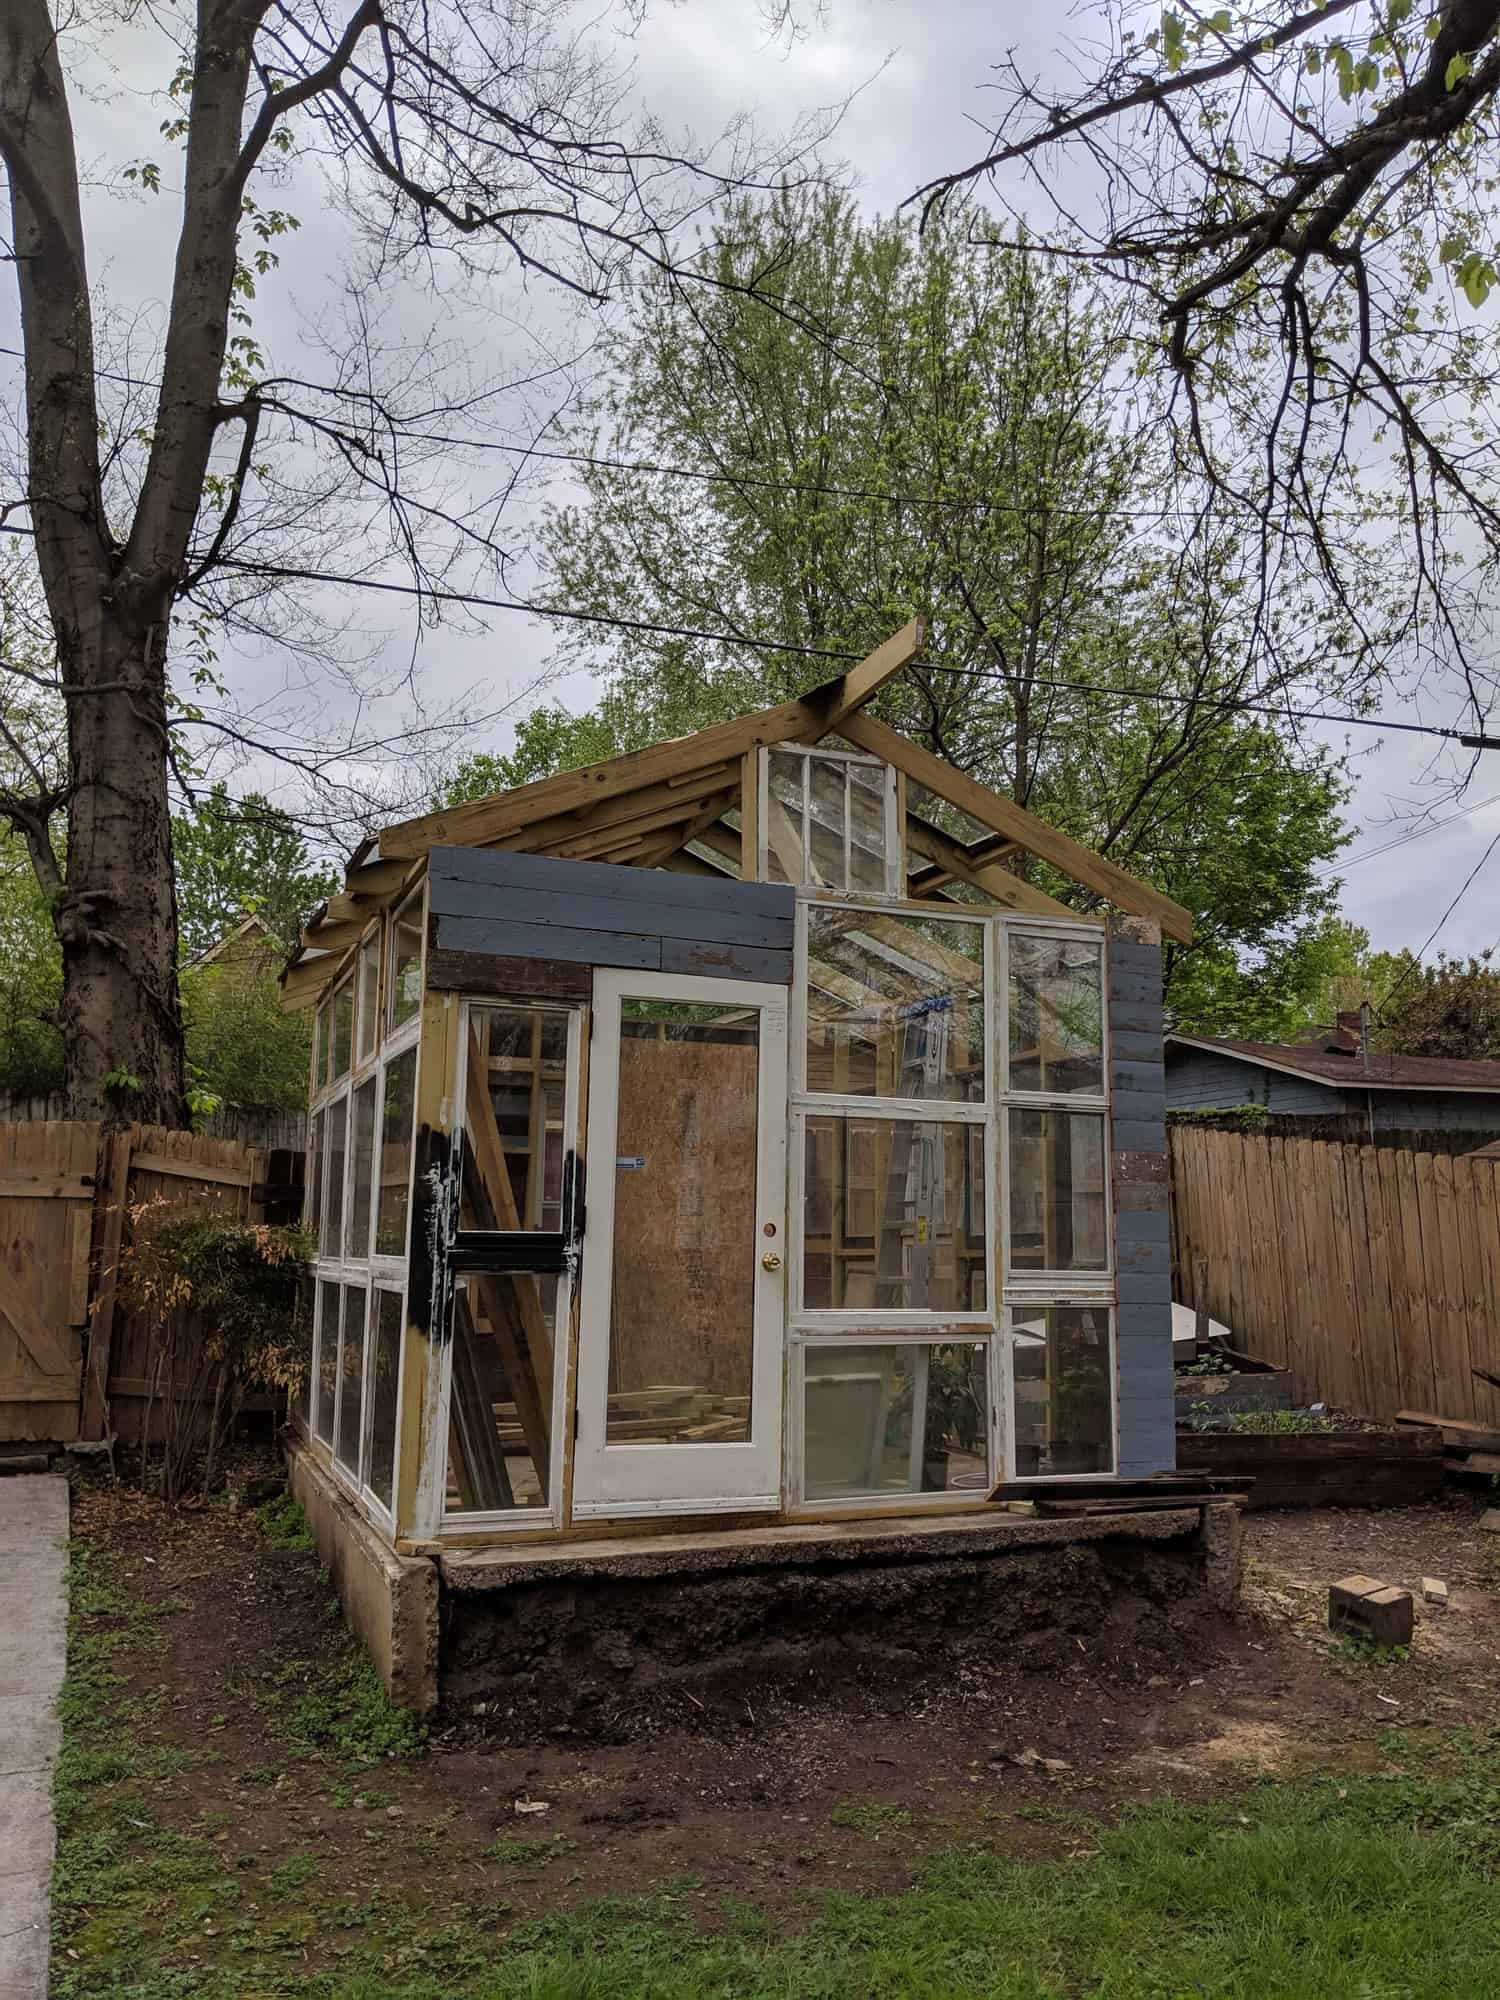 wooden frame of greenhouse with old windows and a door in it